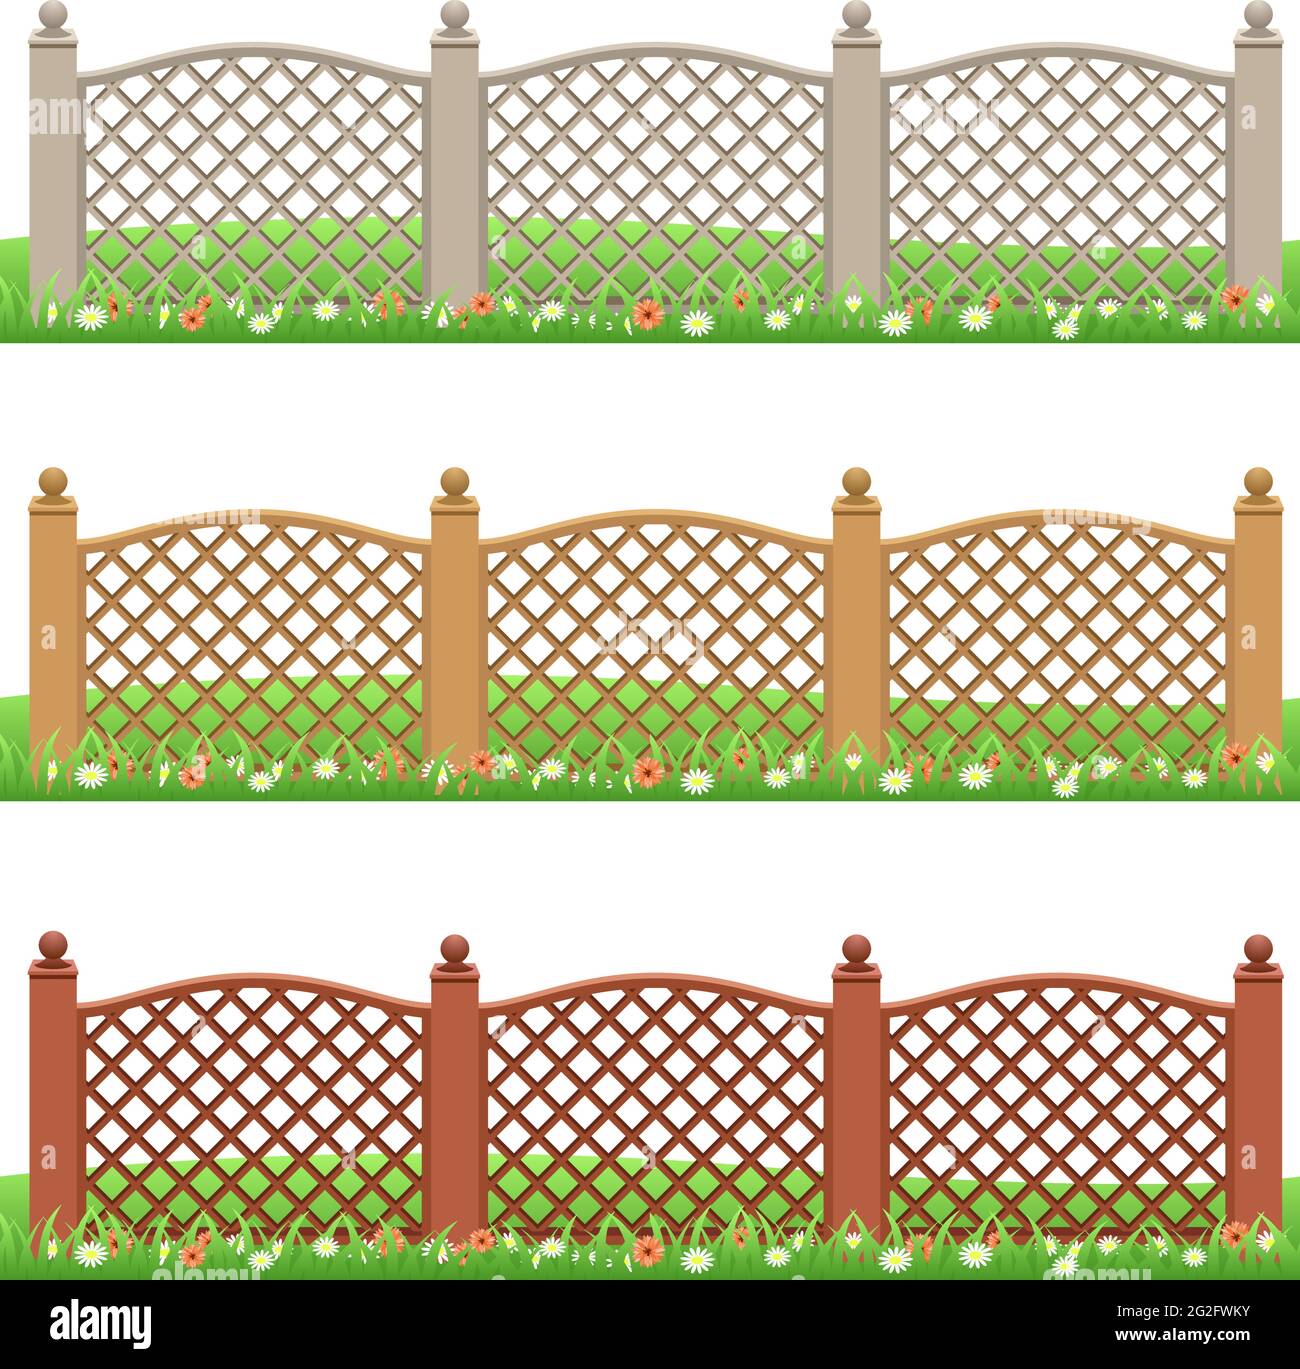 Set of farm or garden fences isolated on white background with grass and flowers. Front view, can be used as scene elements for game or cartoon asset. Stock Vector